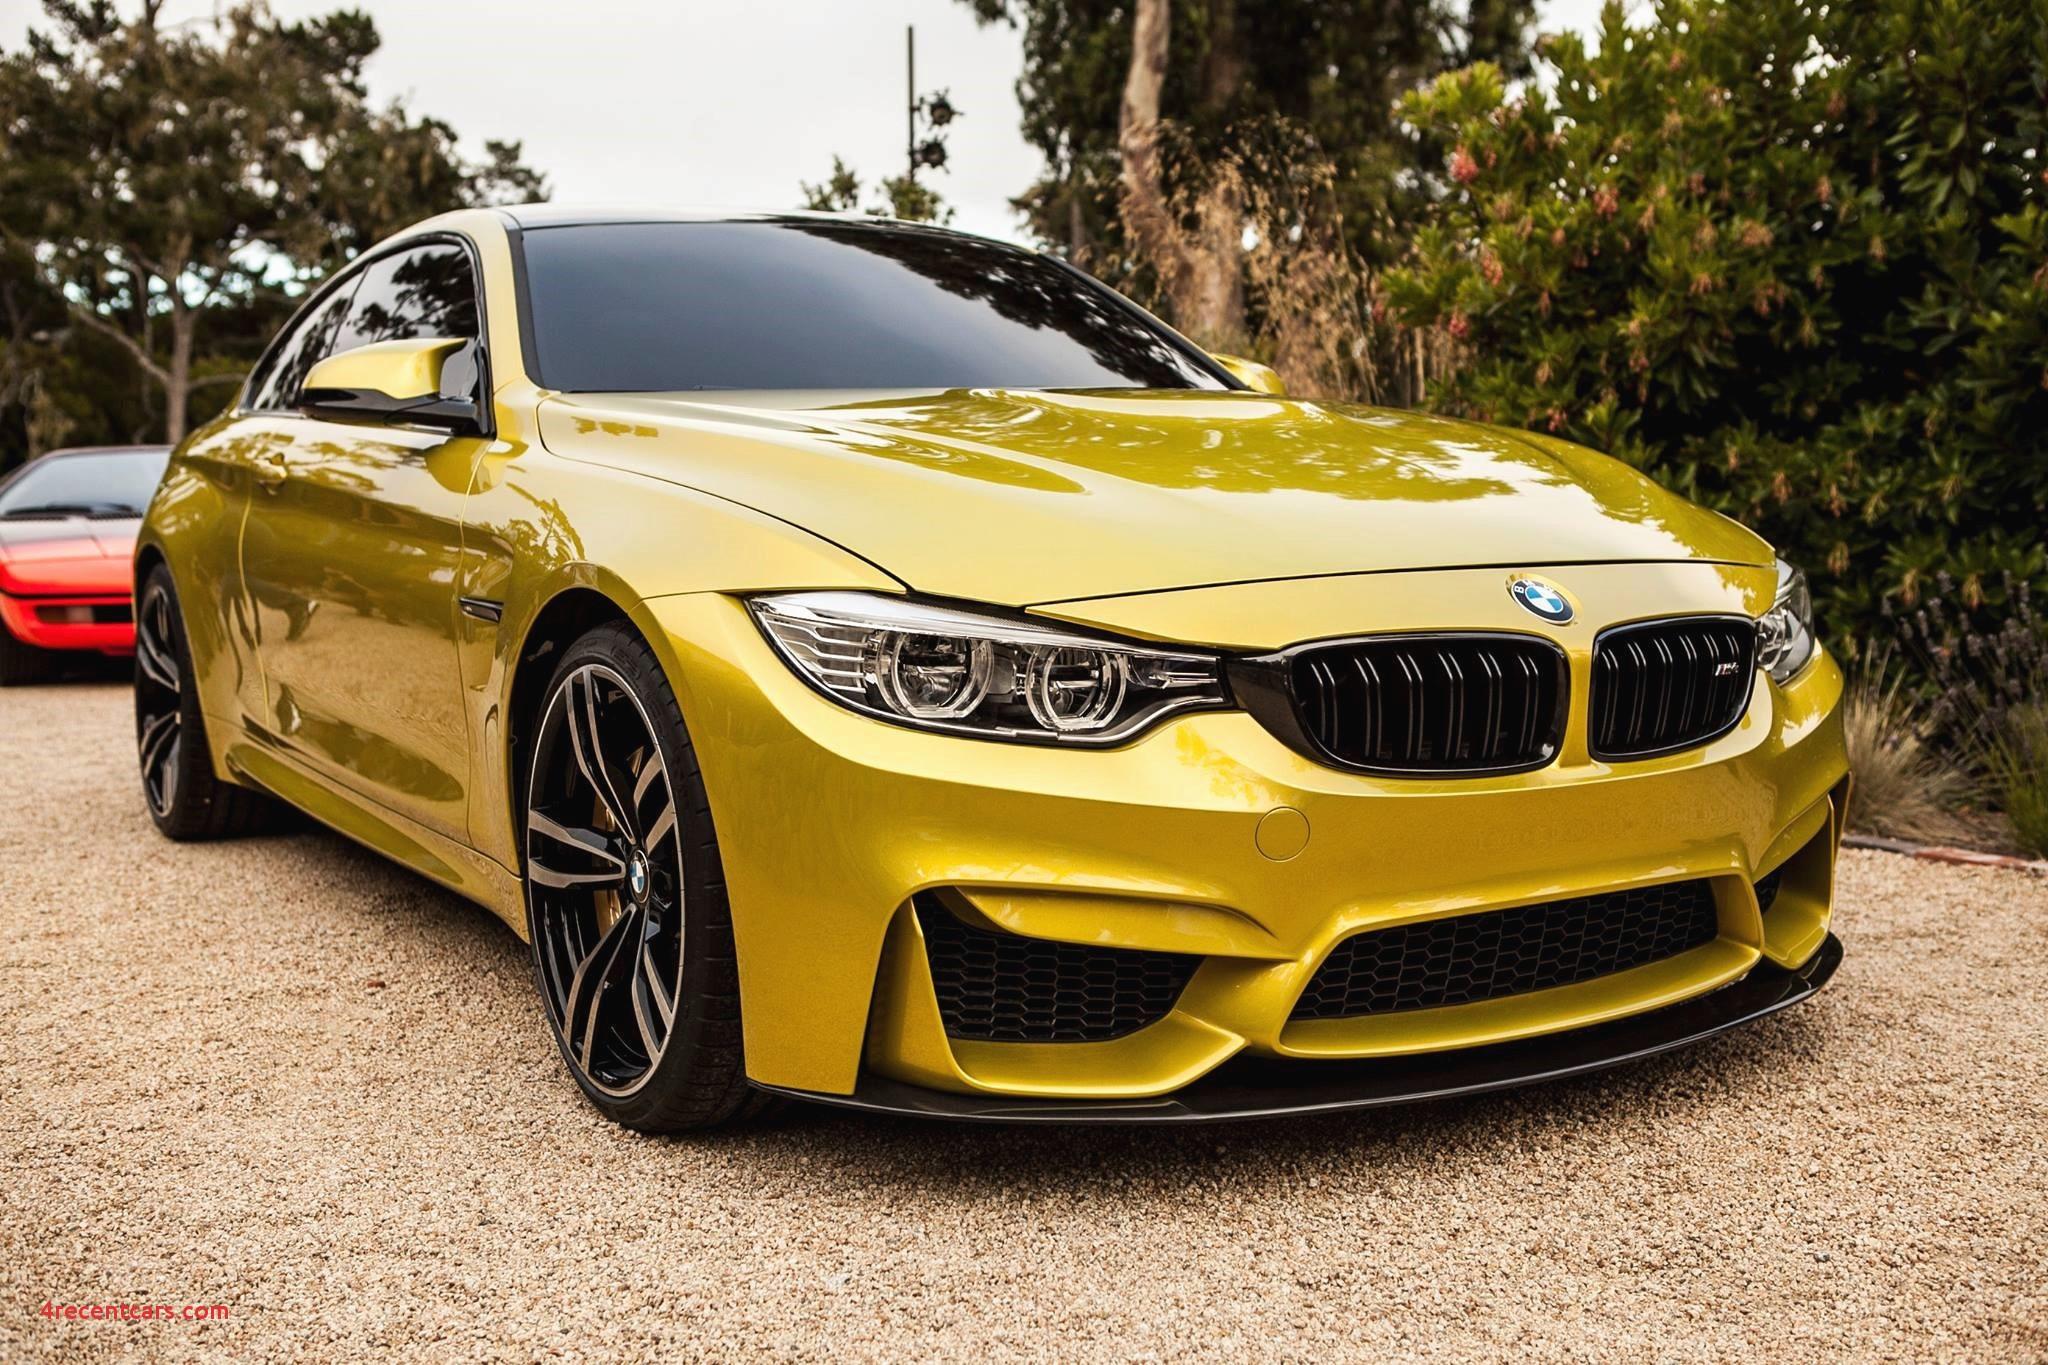 bmw car HD wallpaper free download Archives